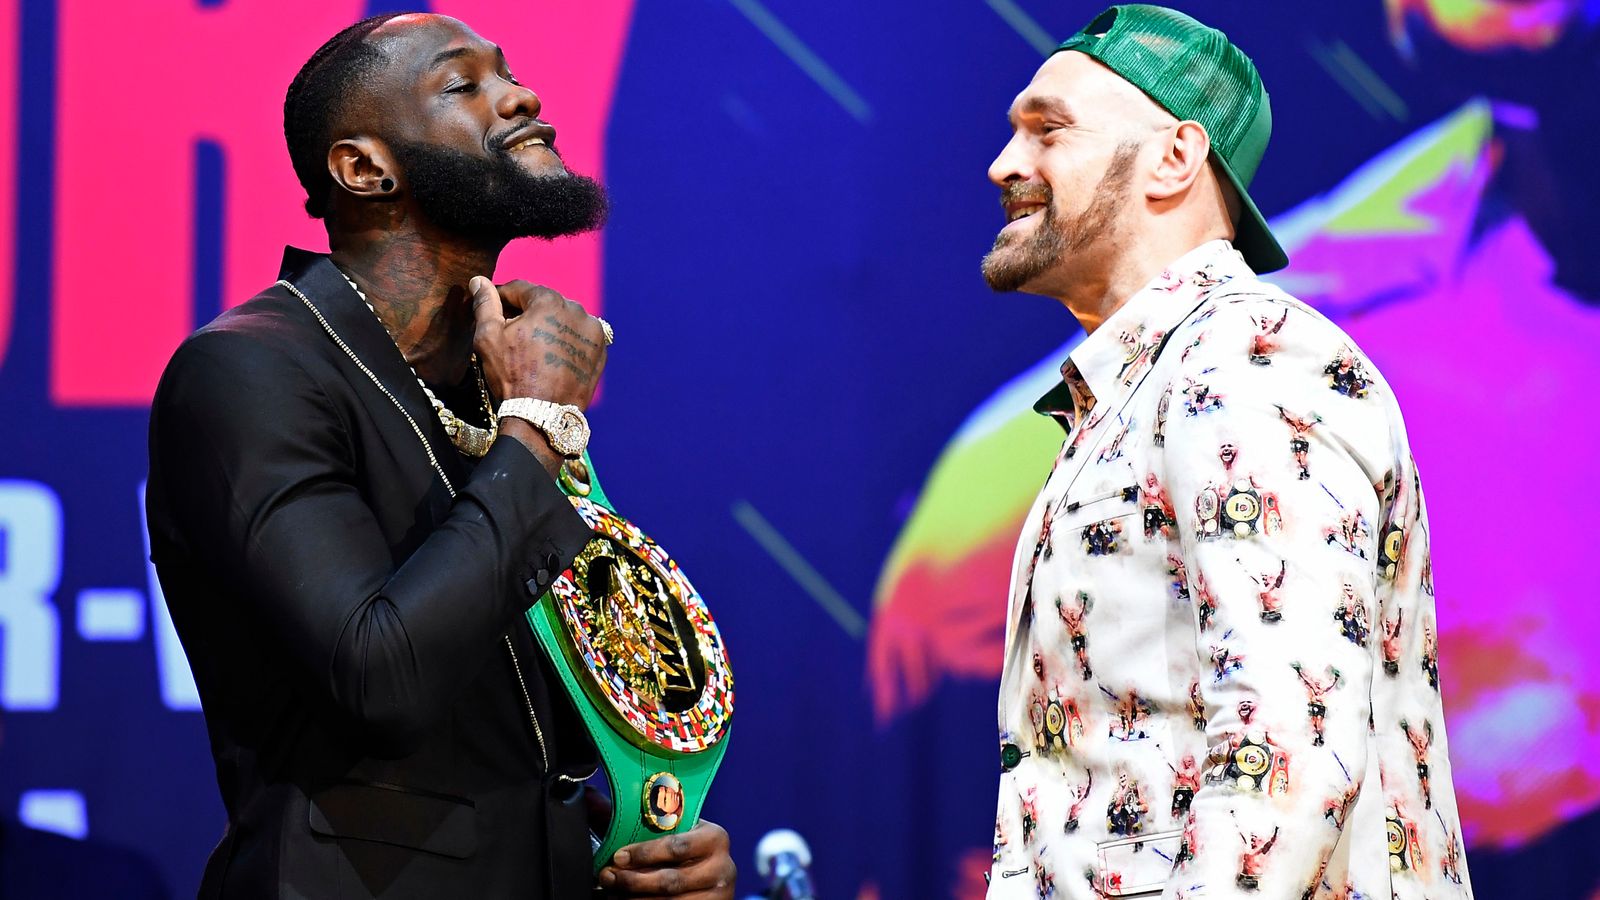 Wilder vs Fury 2: Deontay Wilder will be ‘bigger’ and has an ‘advantage ...